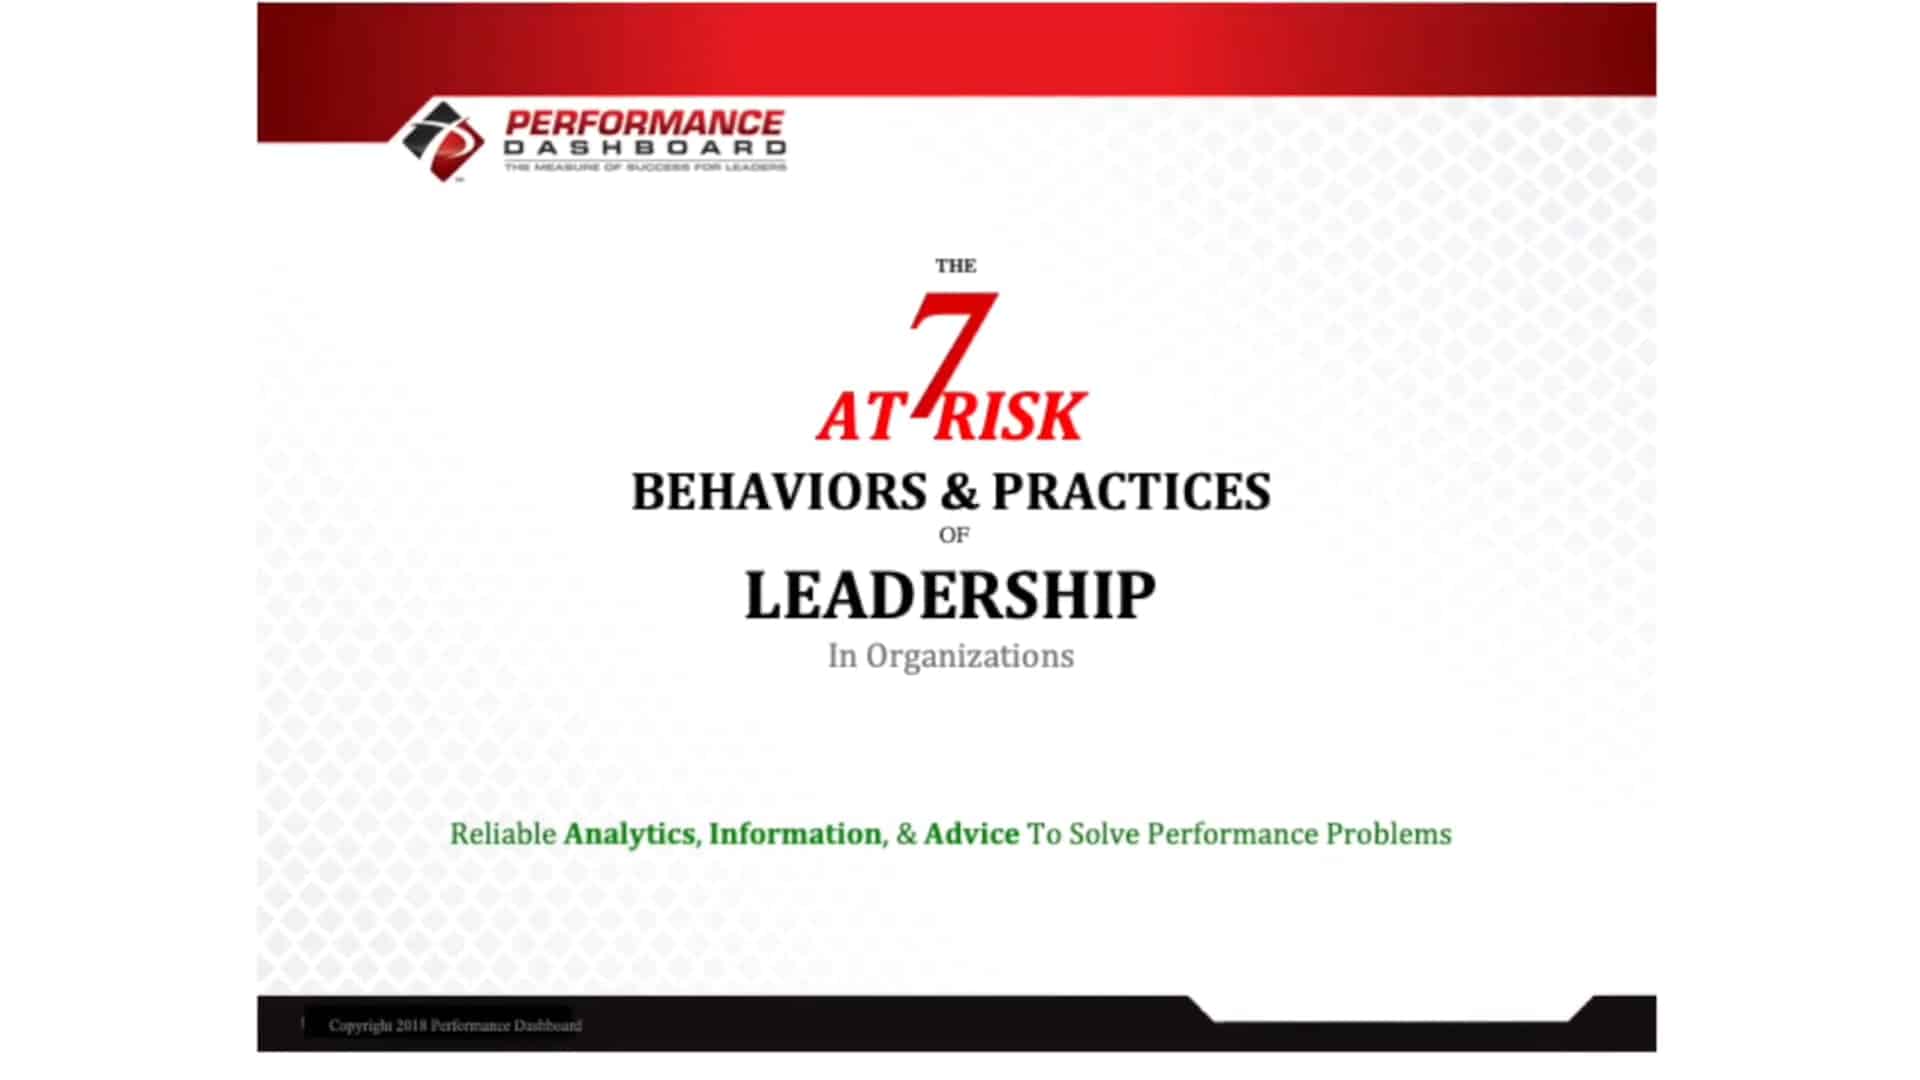 The 7 At Risk Behaviors & Practices of Leadership